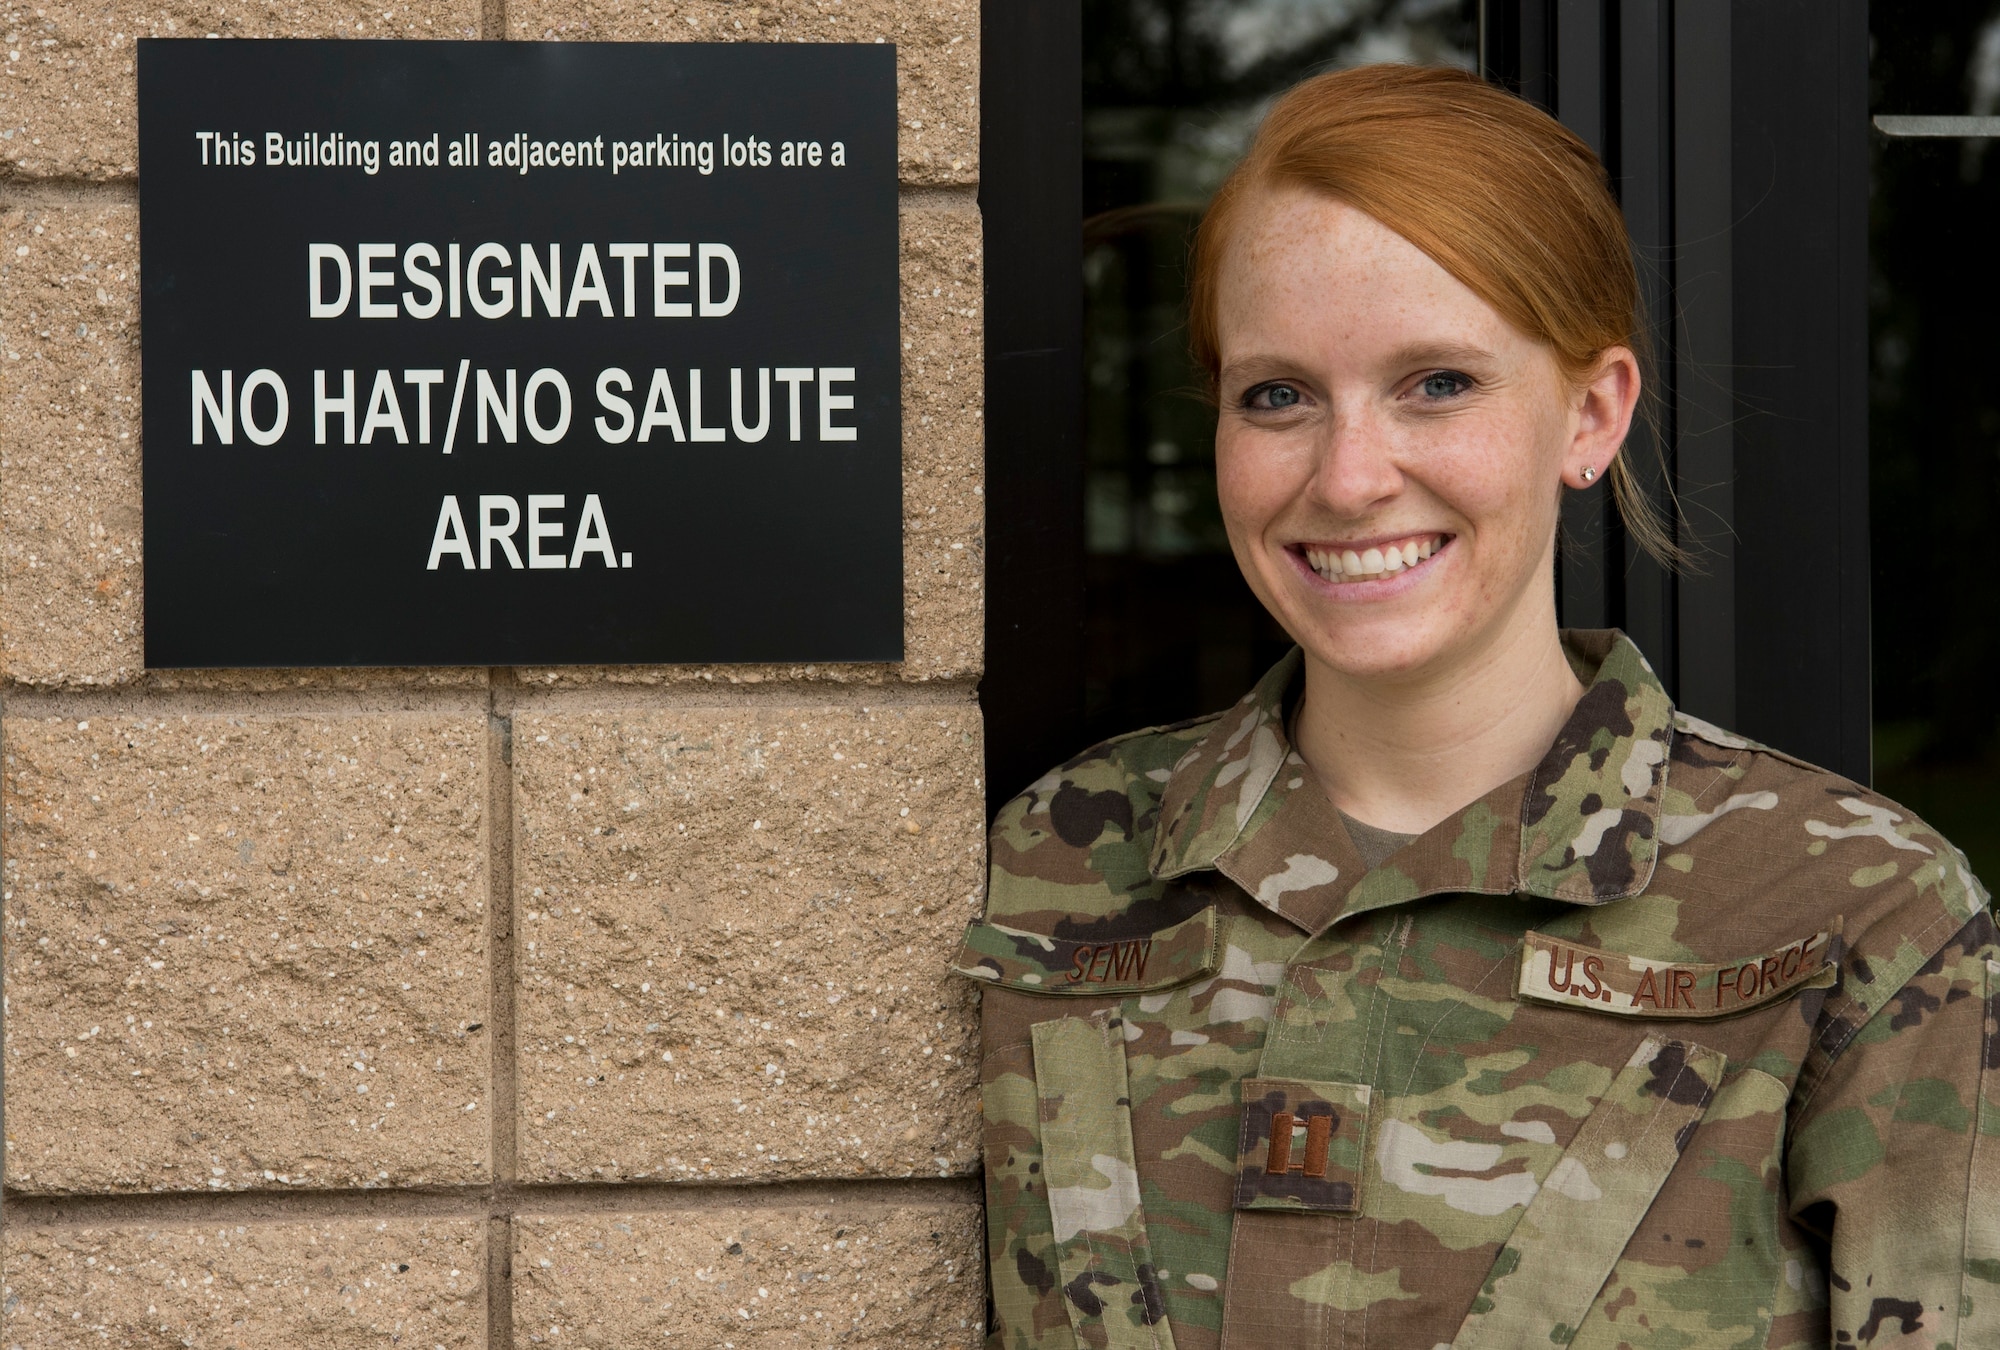 U.S. Air Force Capt. Emilee Senn, 337th Recruiting Squadron operations flight commander, stands next to a designated No Hat/No Salute area sign at the 20th Force Support Squadron Child Development Center at Shaw Air Force Base, South Carolina, Aug. 27, 2019.